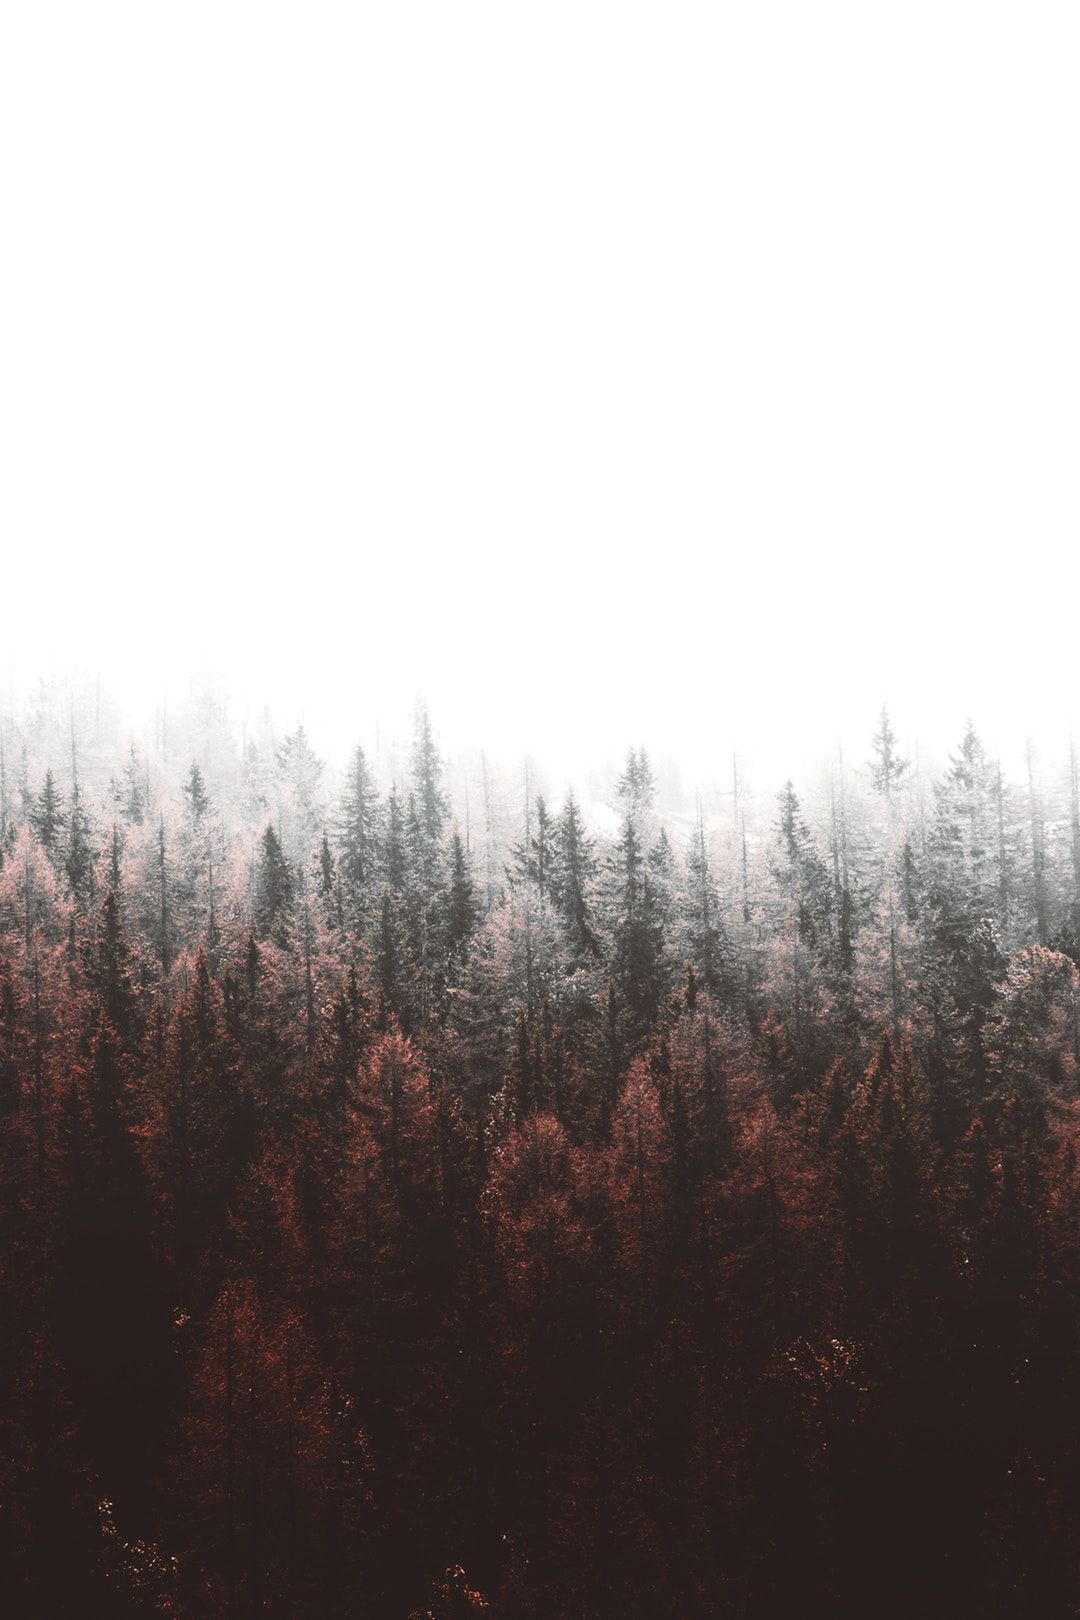 Forest, tree, pine and white HD photo by Joshua Fuller. Forest wallpaper, Preppy wallpaper, Nature wallpaper